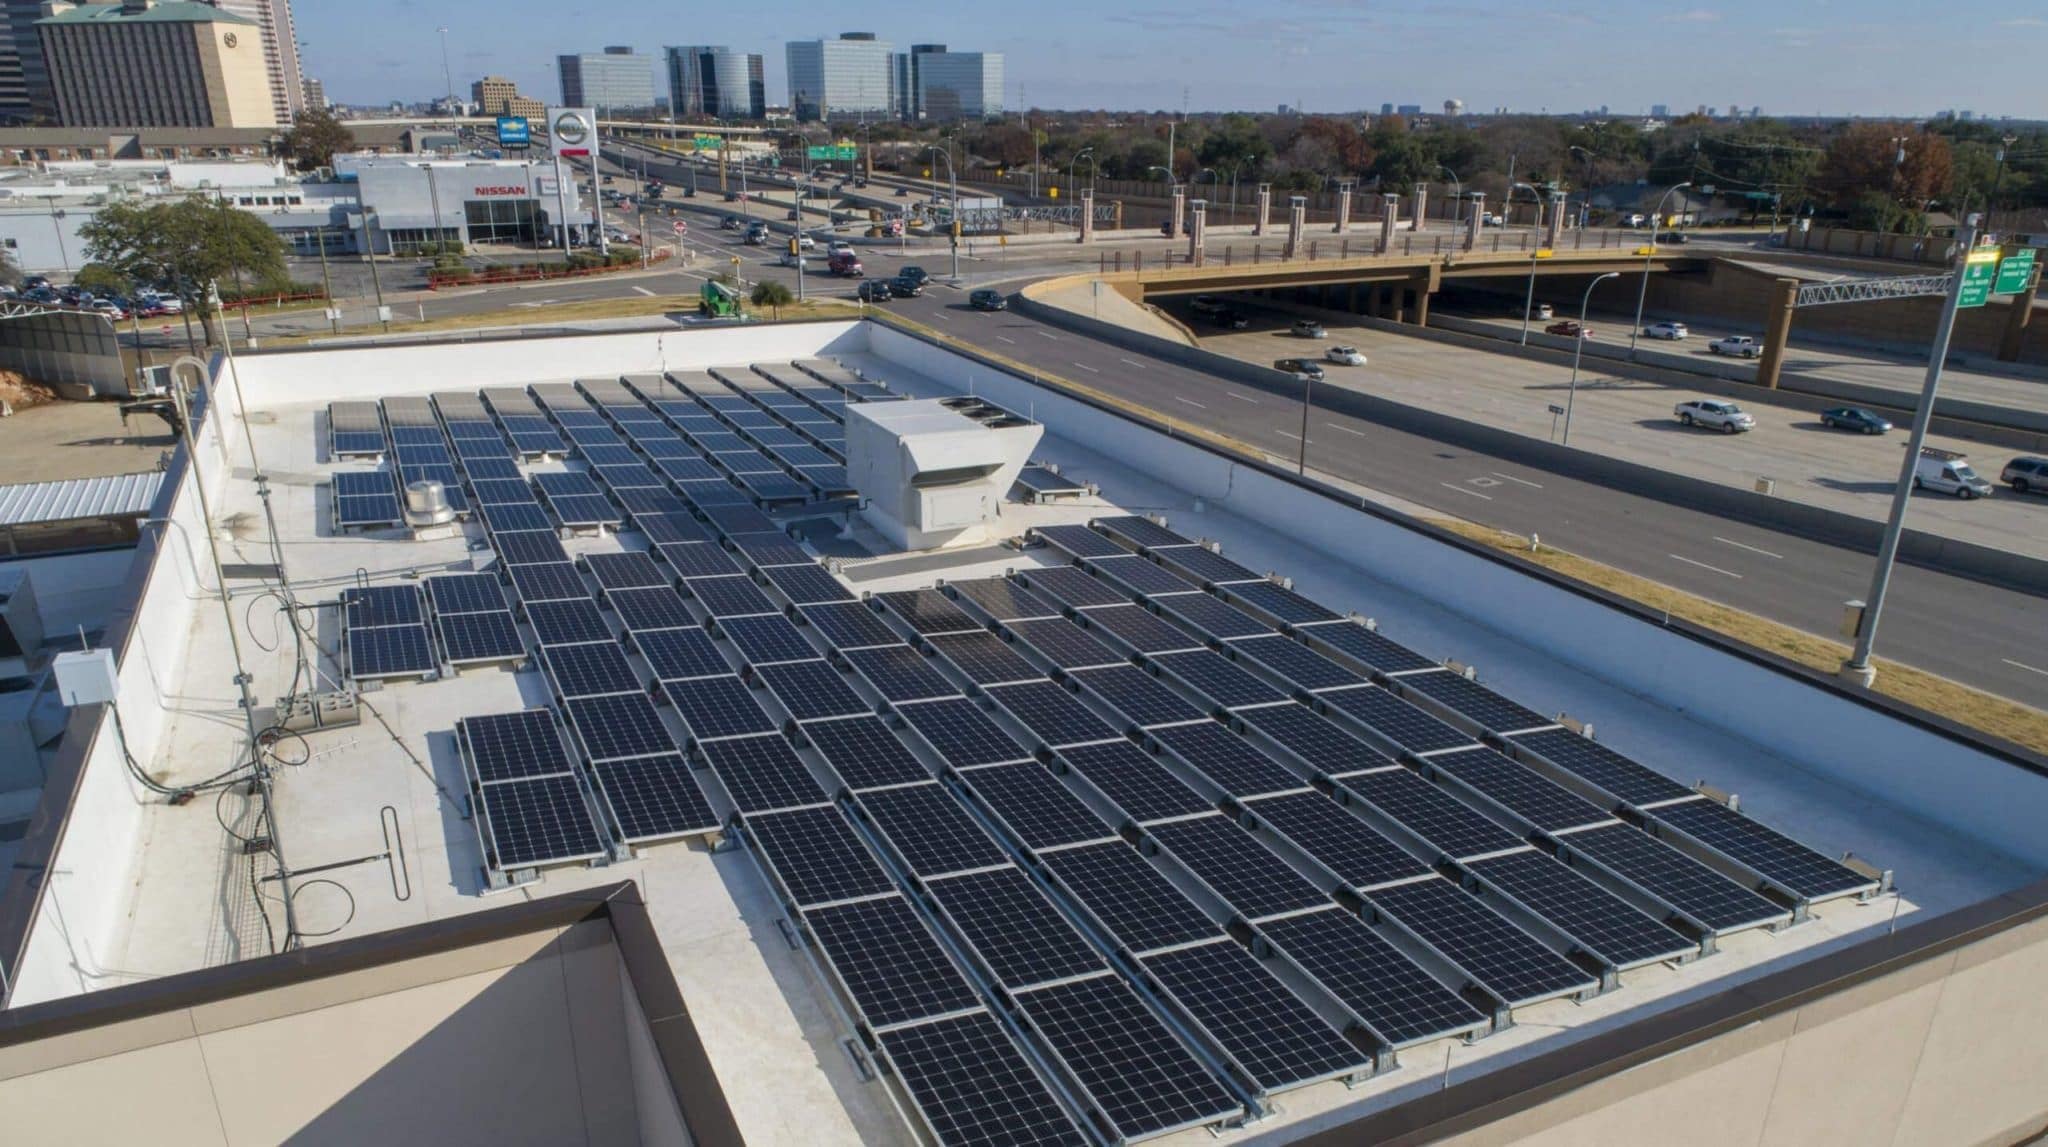 Rooftop covered with solar panels and a view of the North Tarrant Expressway